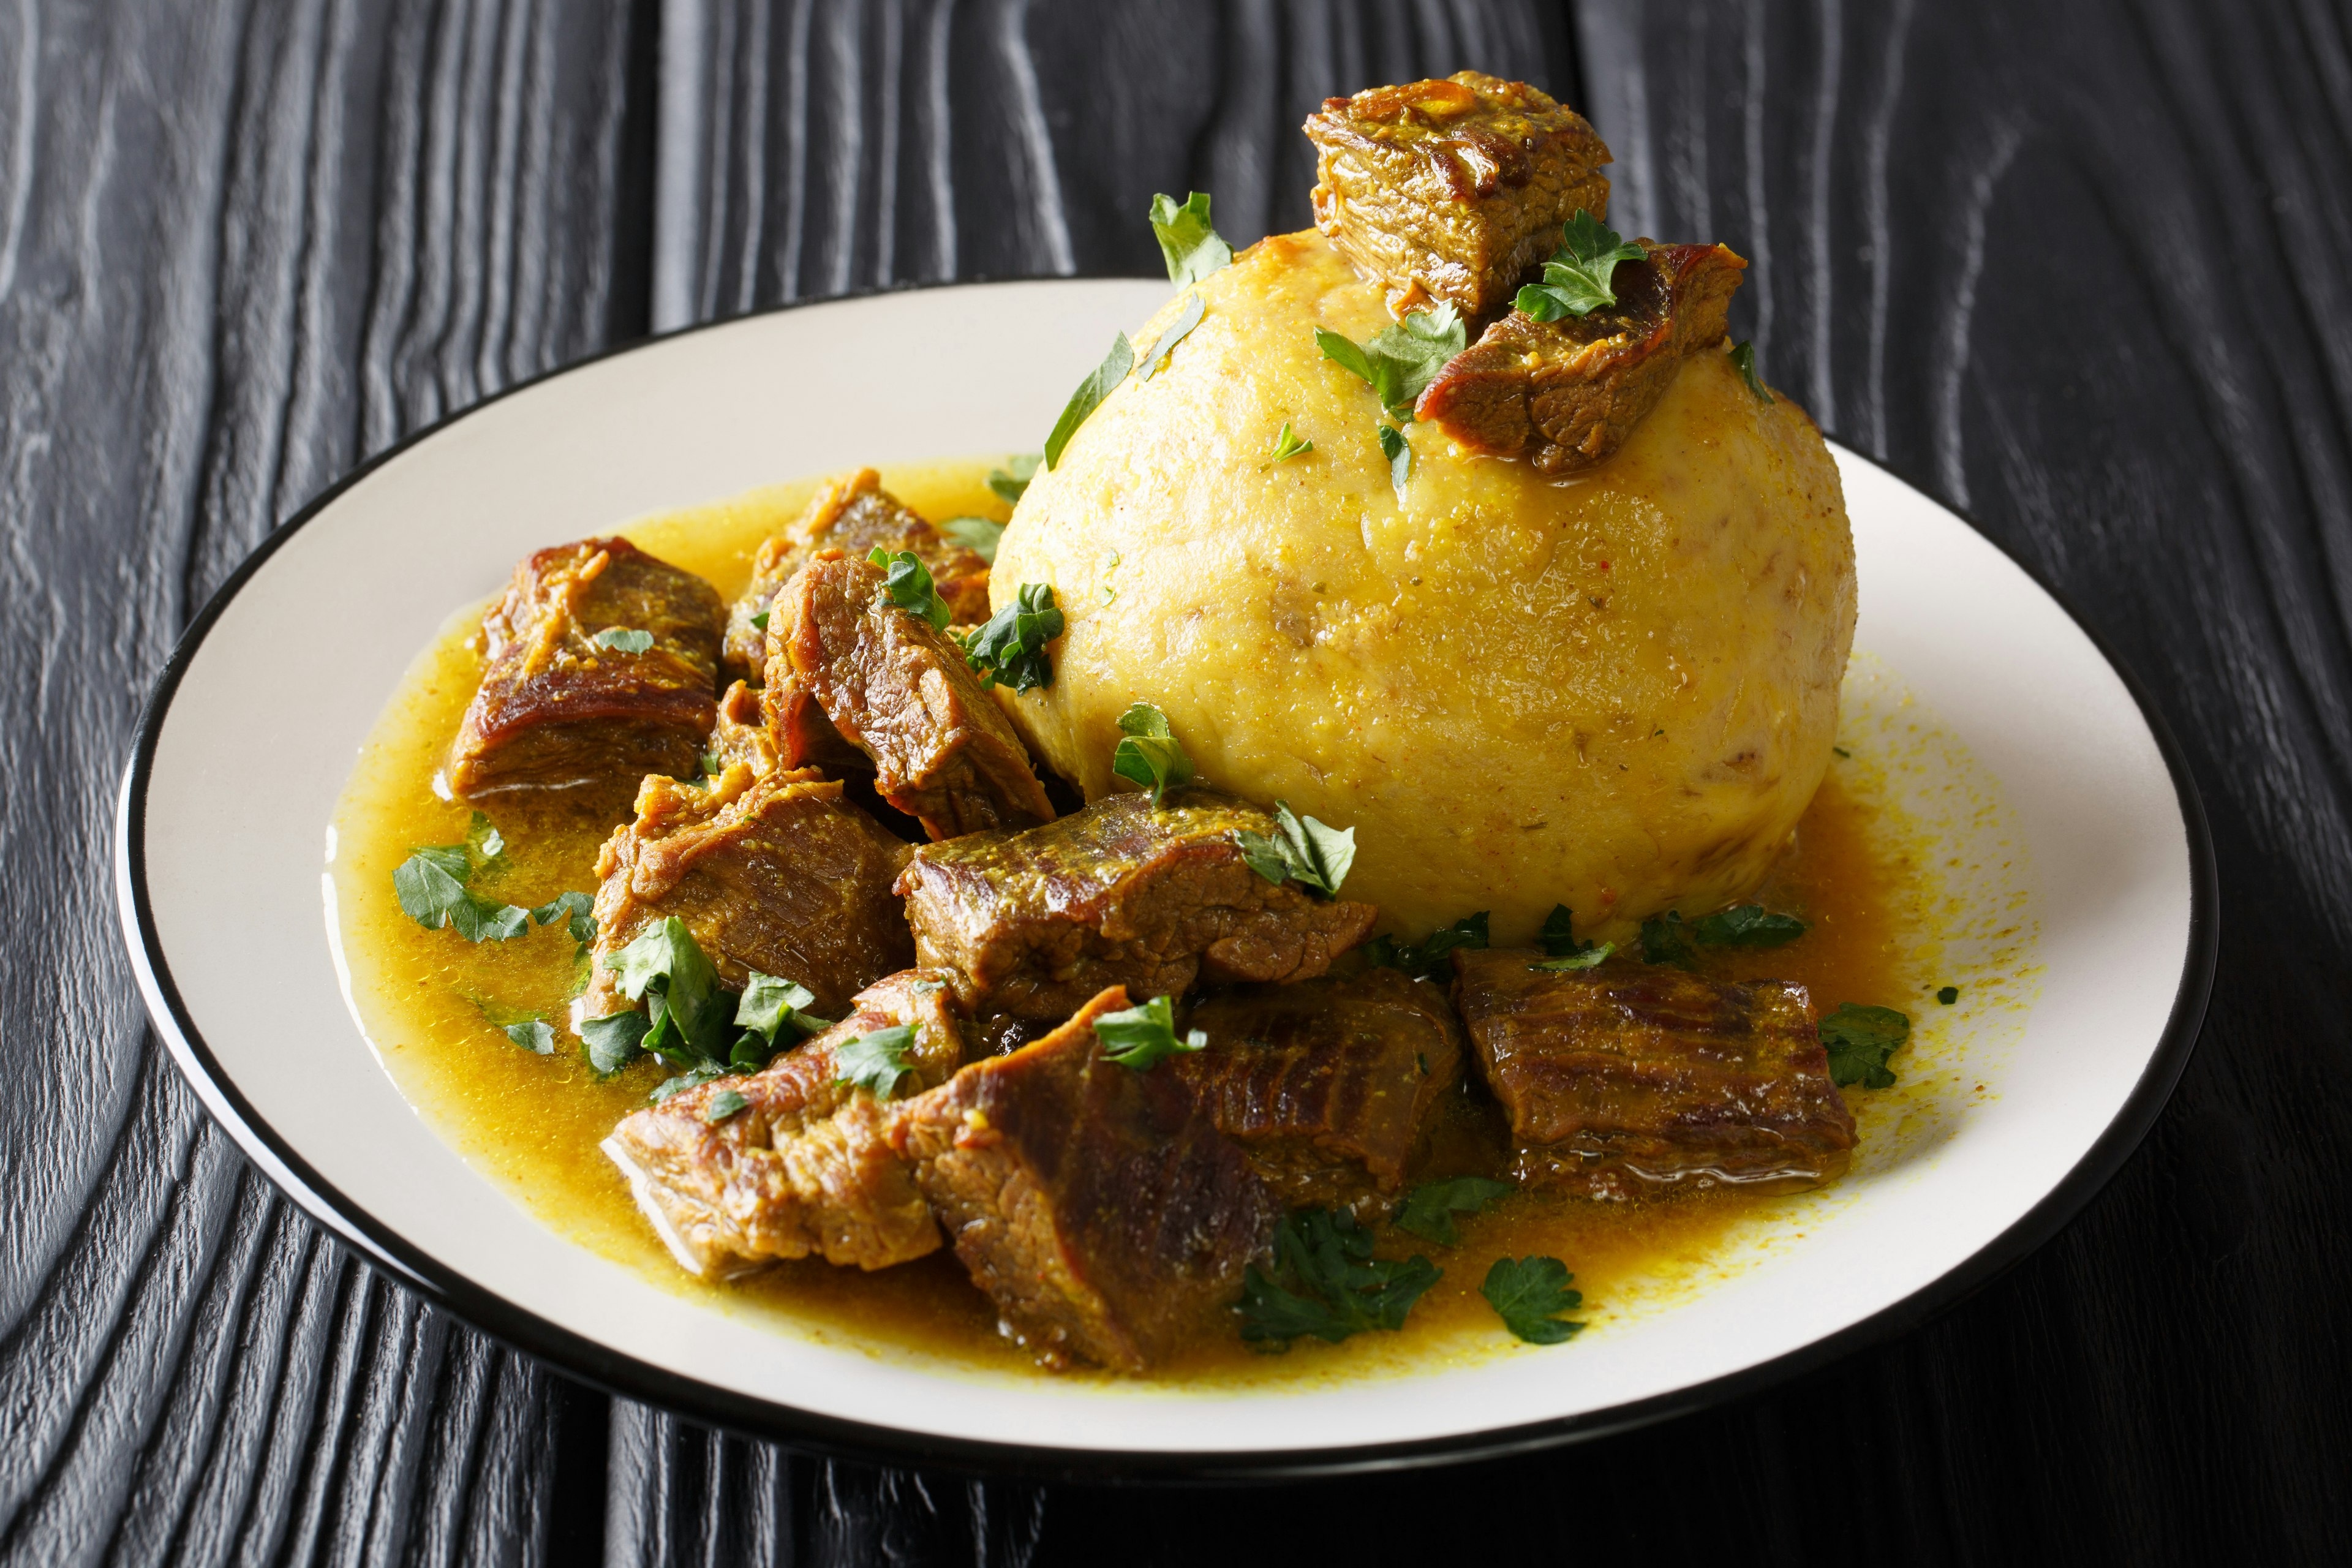 Closeup of a plate of spicy mofongo topped with chicharron and served next to meat and broth.  